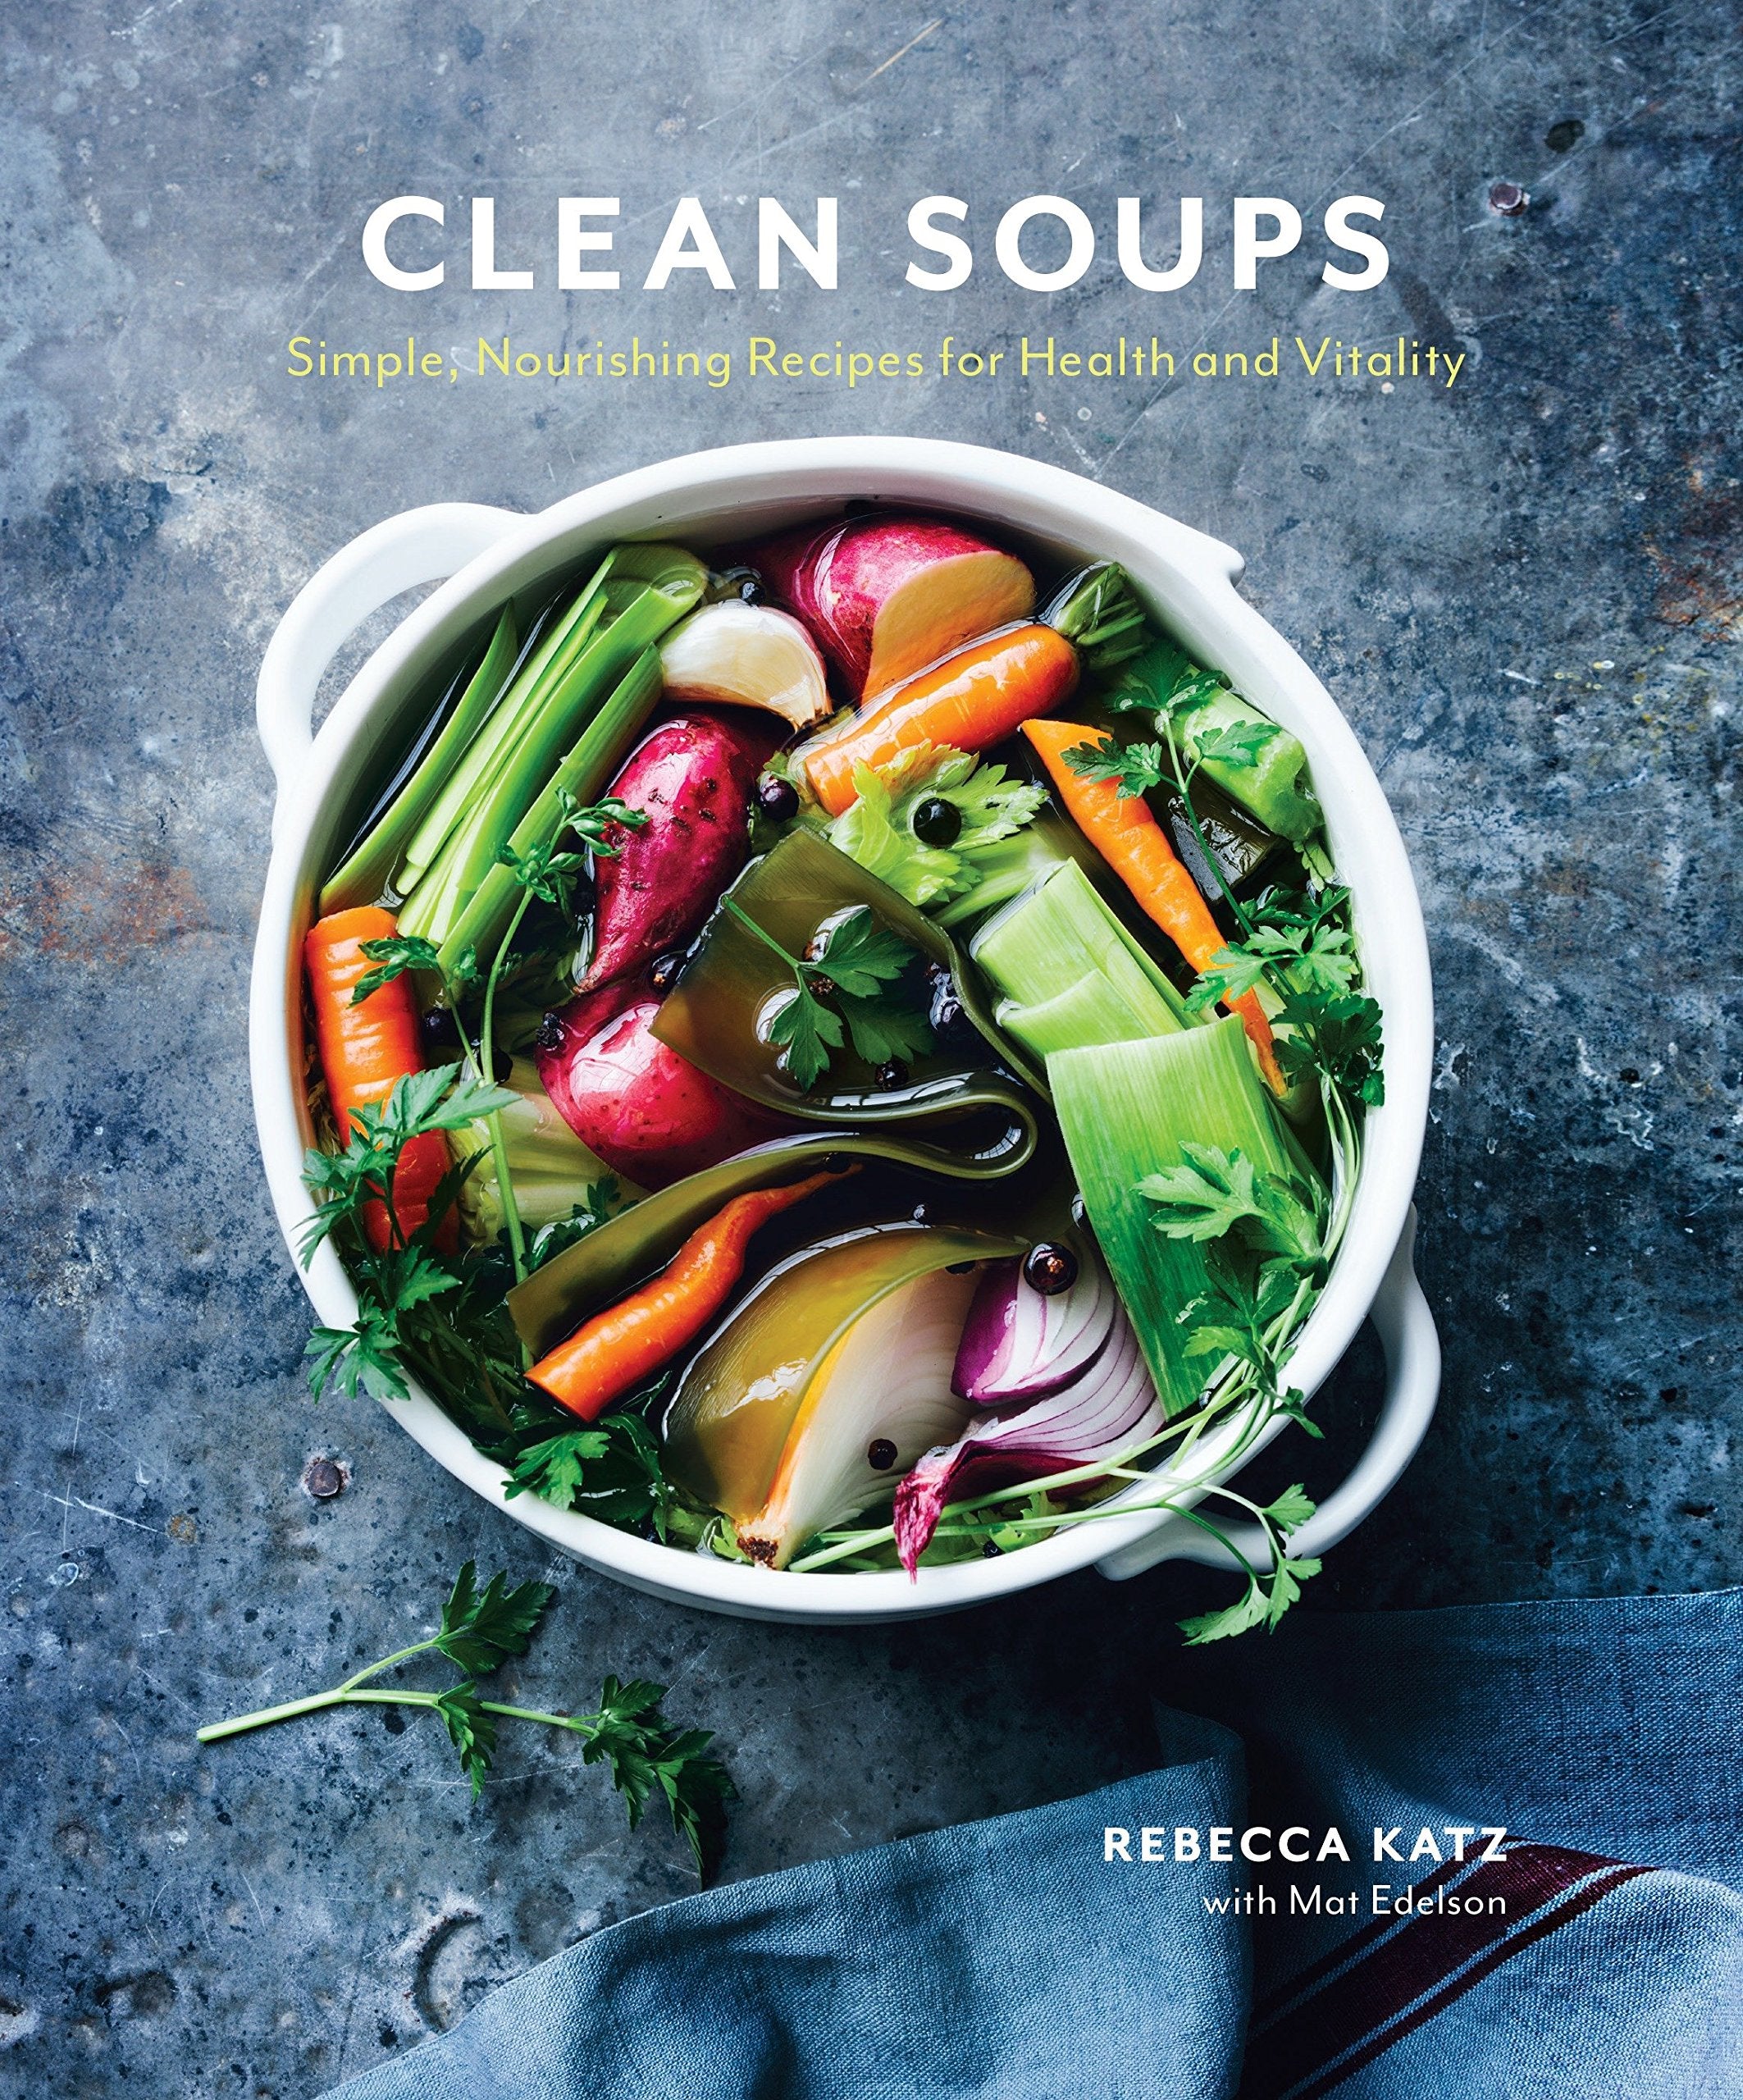 Clean Soups: Simple, Nourishing Recipes for Health and Vitality (Rebecca Katz)